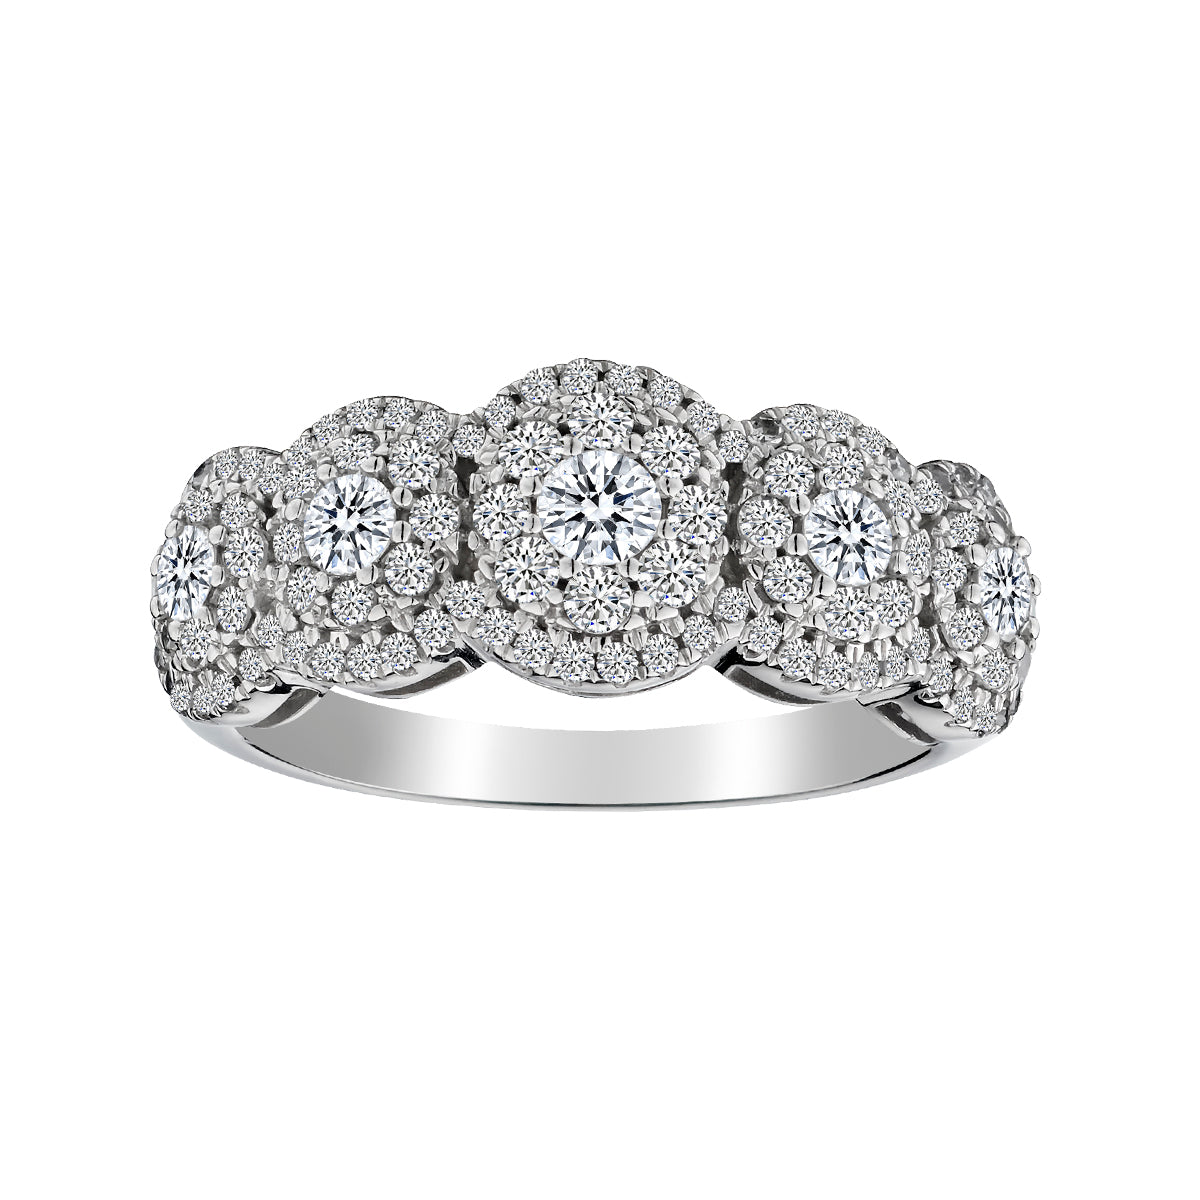 1.00 Carat of Diamonds Band, 10kt White Gold.......................NOW